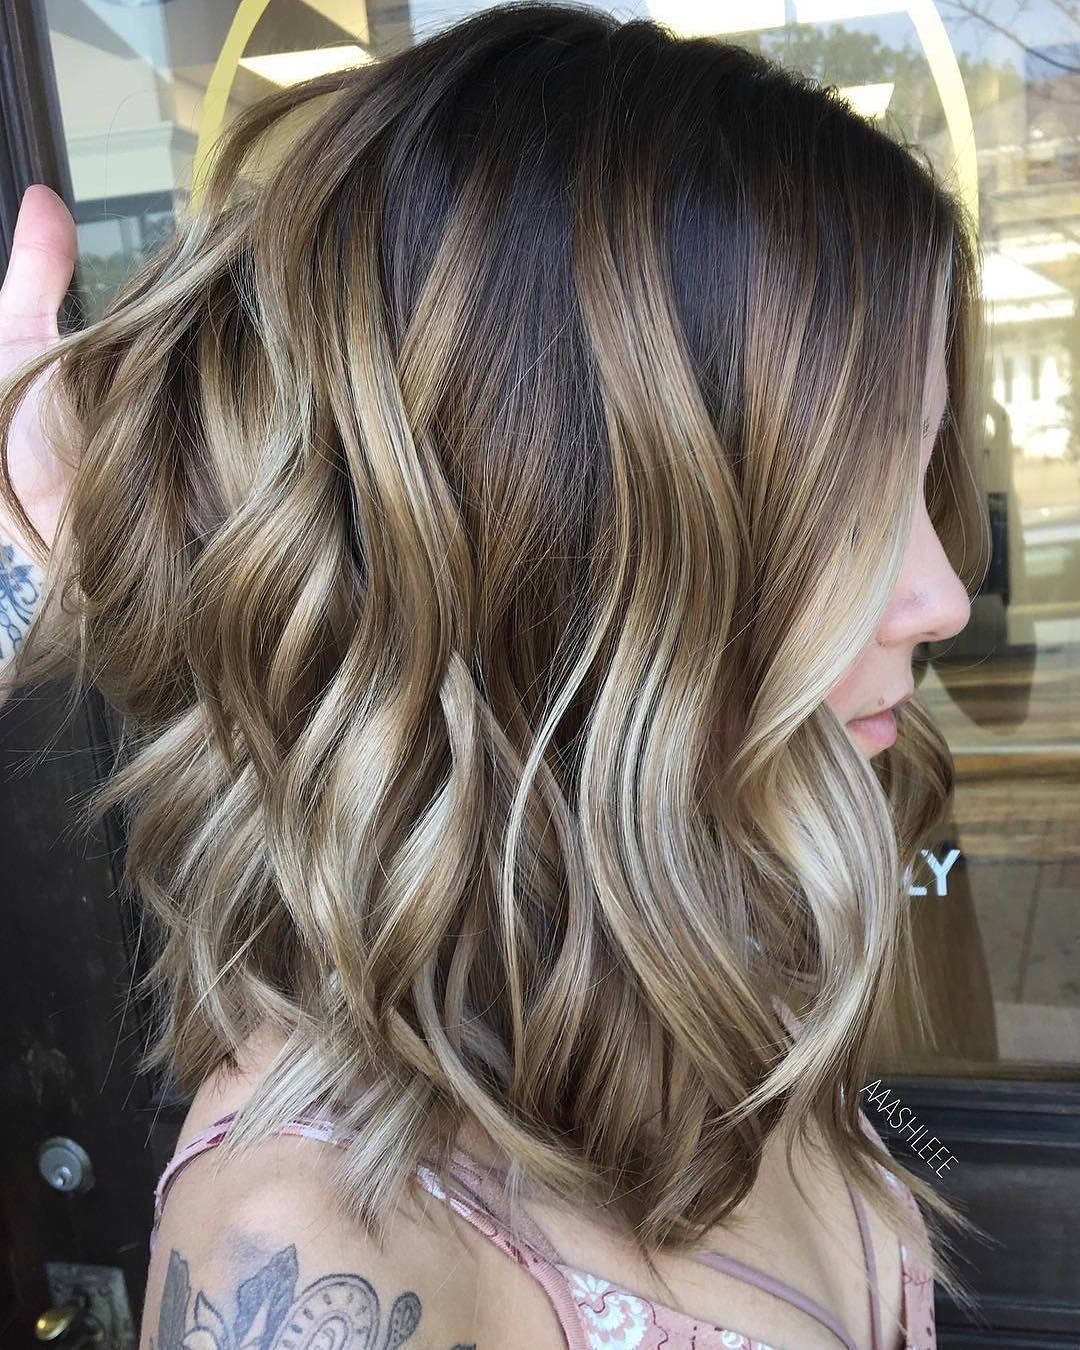 10 Ombre Balayage Hairstyles For Medium Length Hair, Hair Color 2018 Within Well Known Pale Blonde Balayage Hairstyles (View 5 of 20)